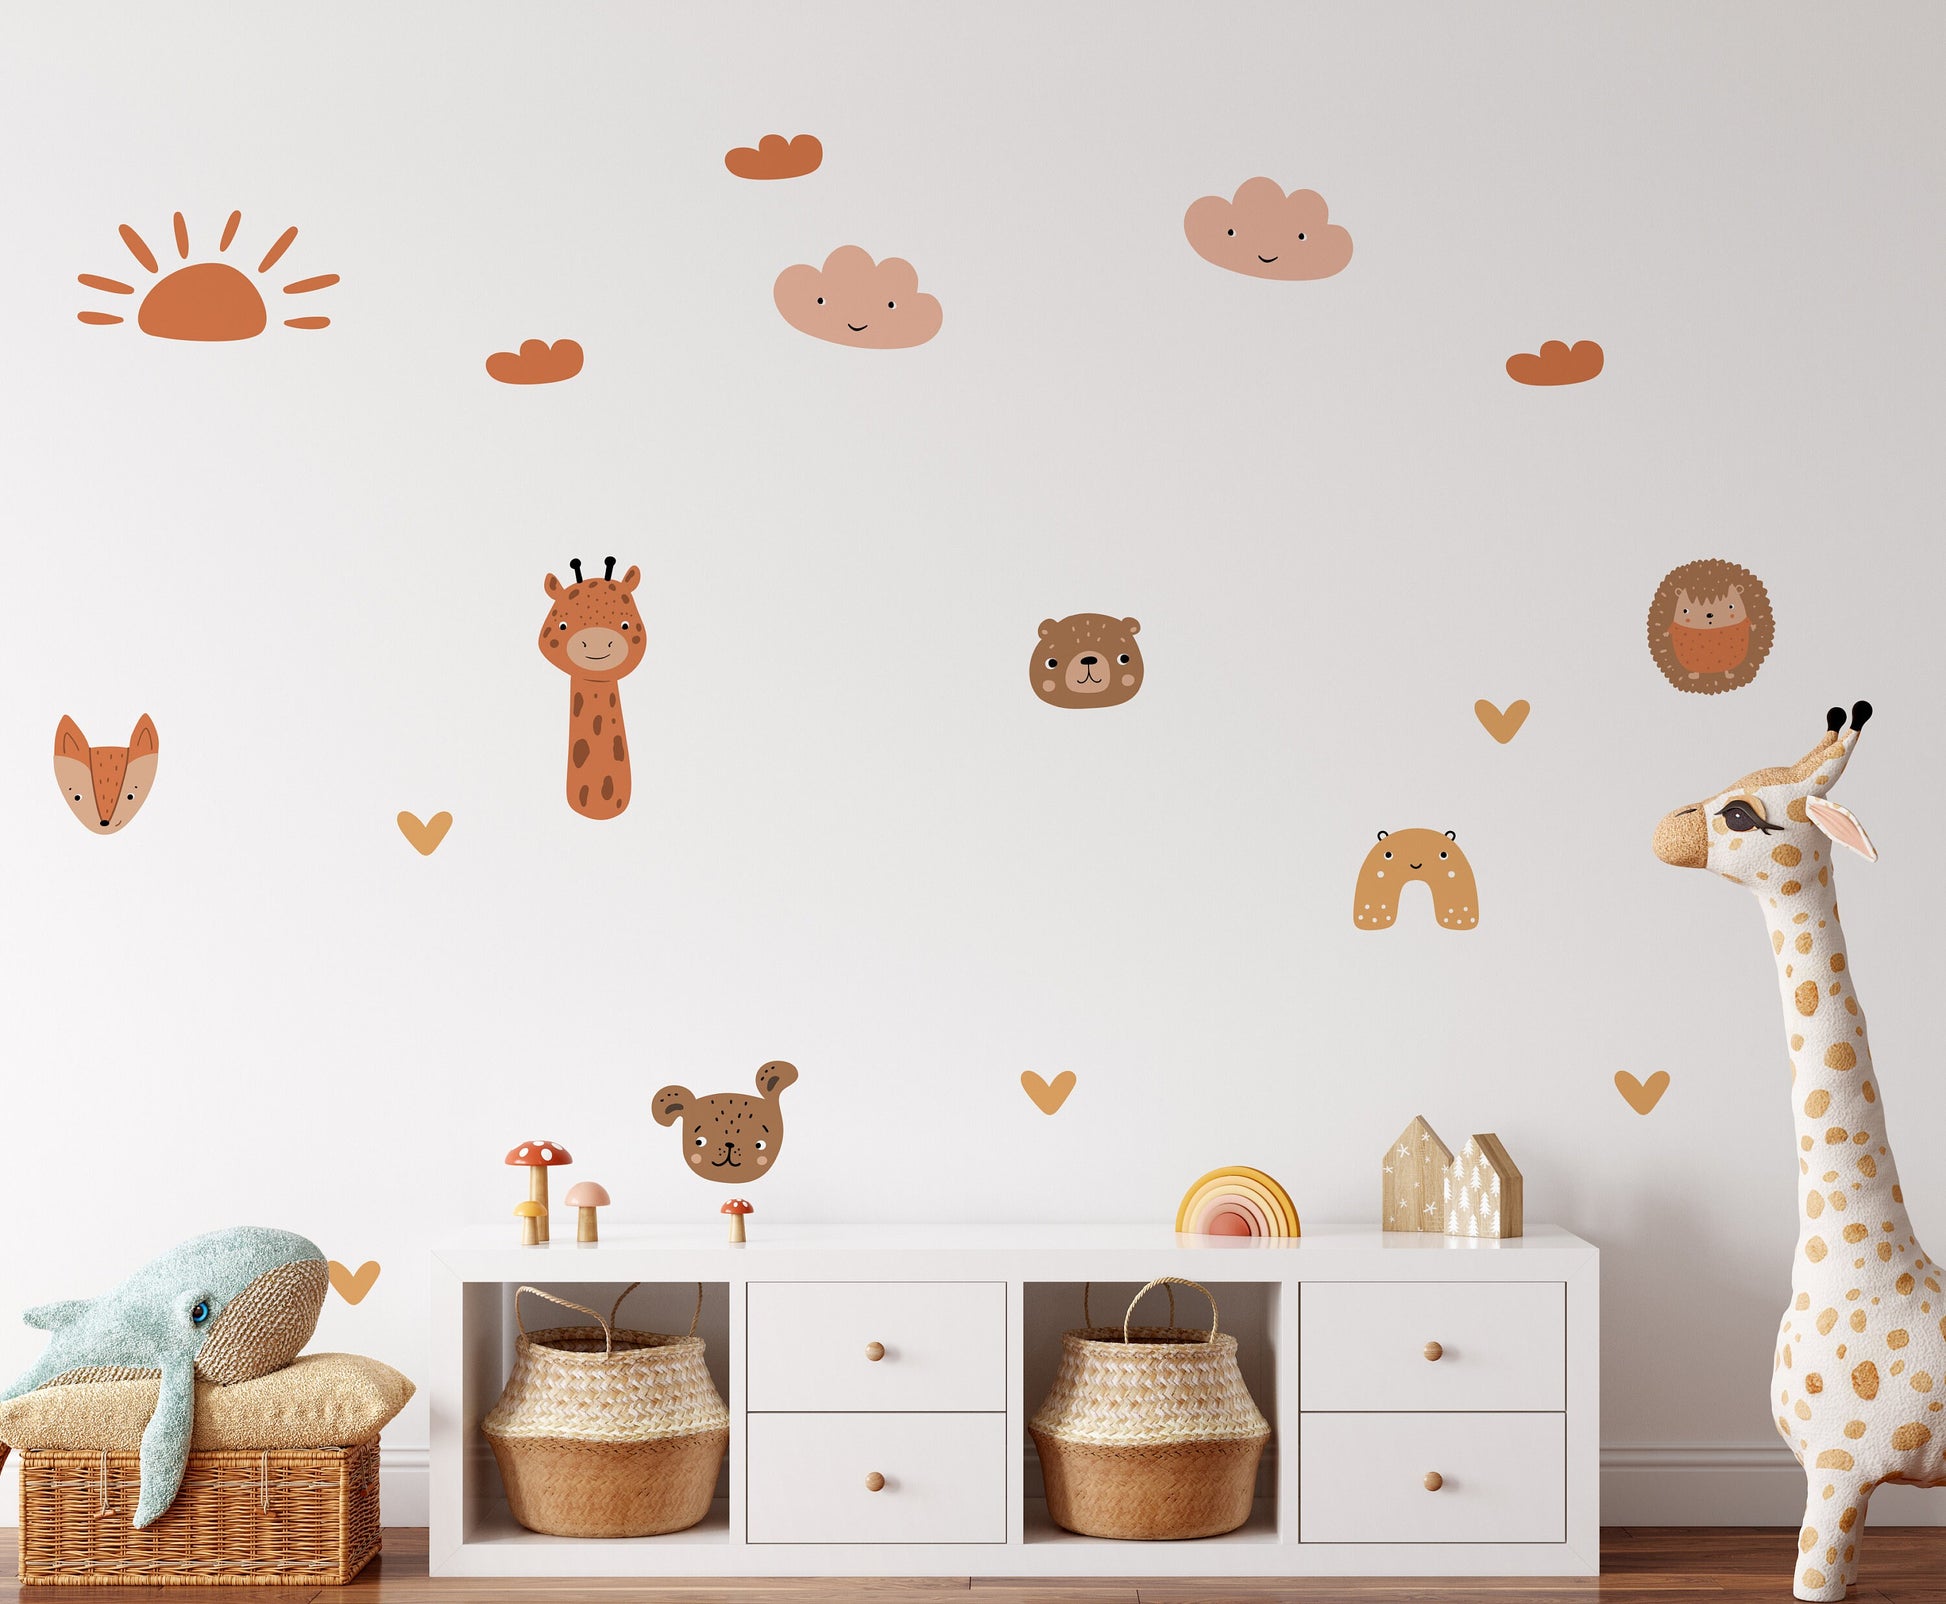 Boho Chic Wall Decor Stickers Decals Animal Chic Nursery Wall Art Kids Childrens Removable Vinyl